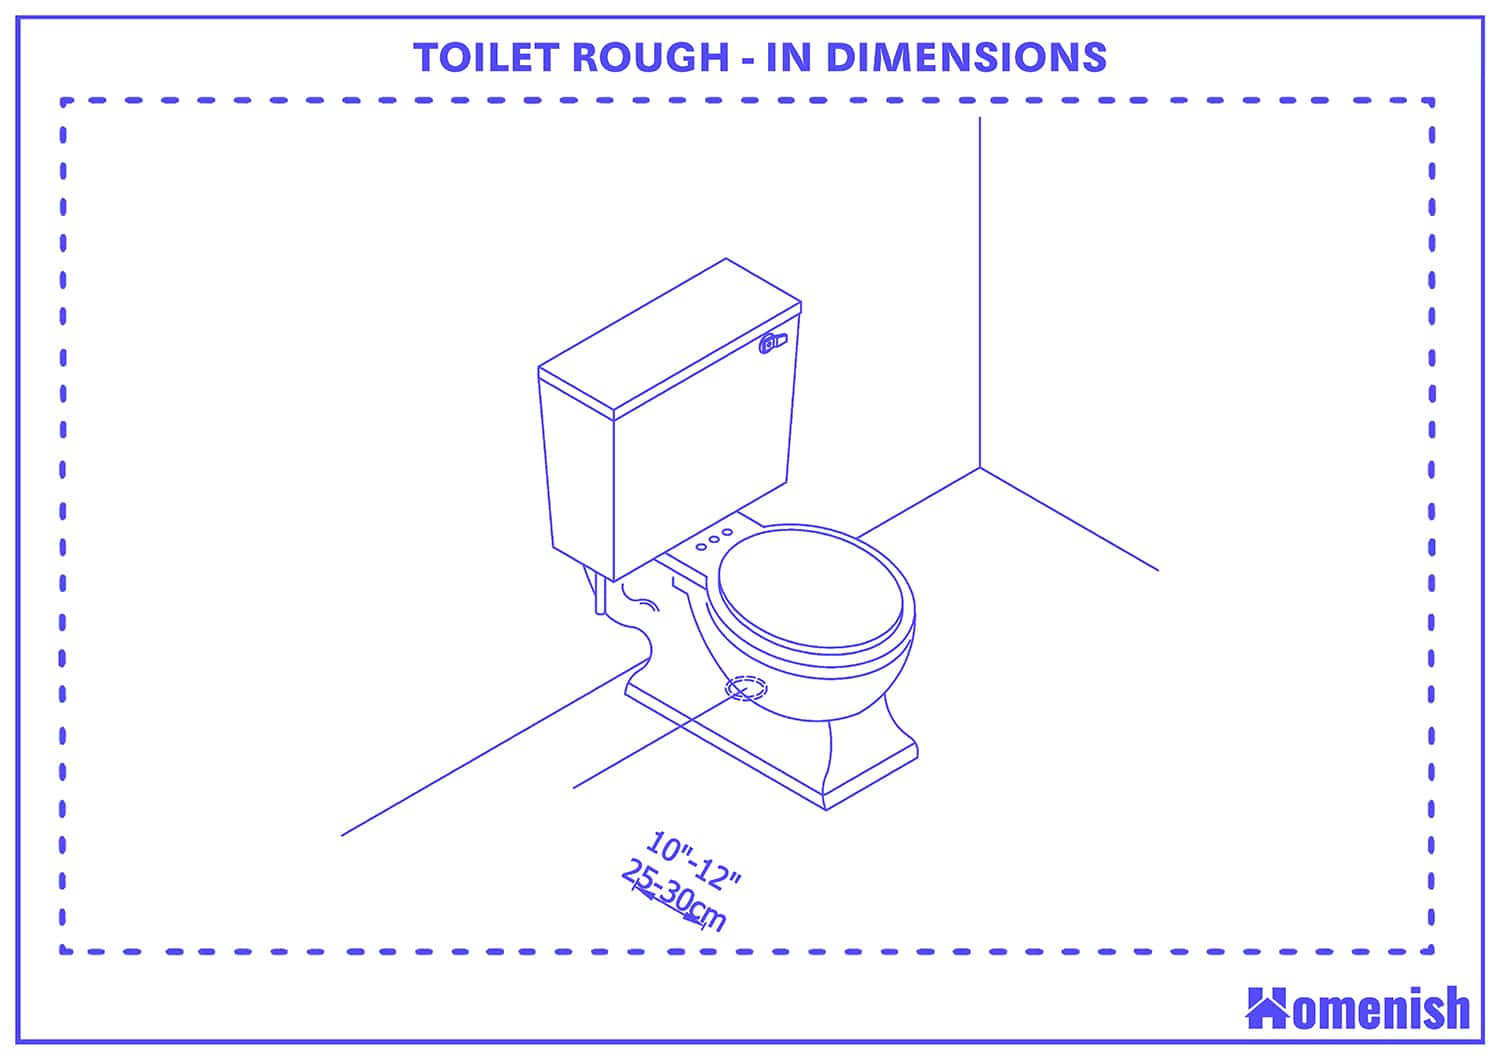 Toilet rough-in distance